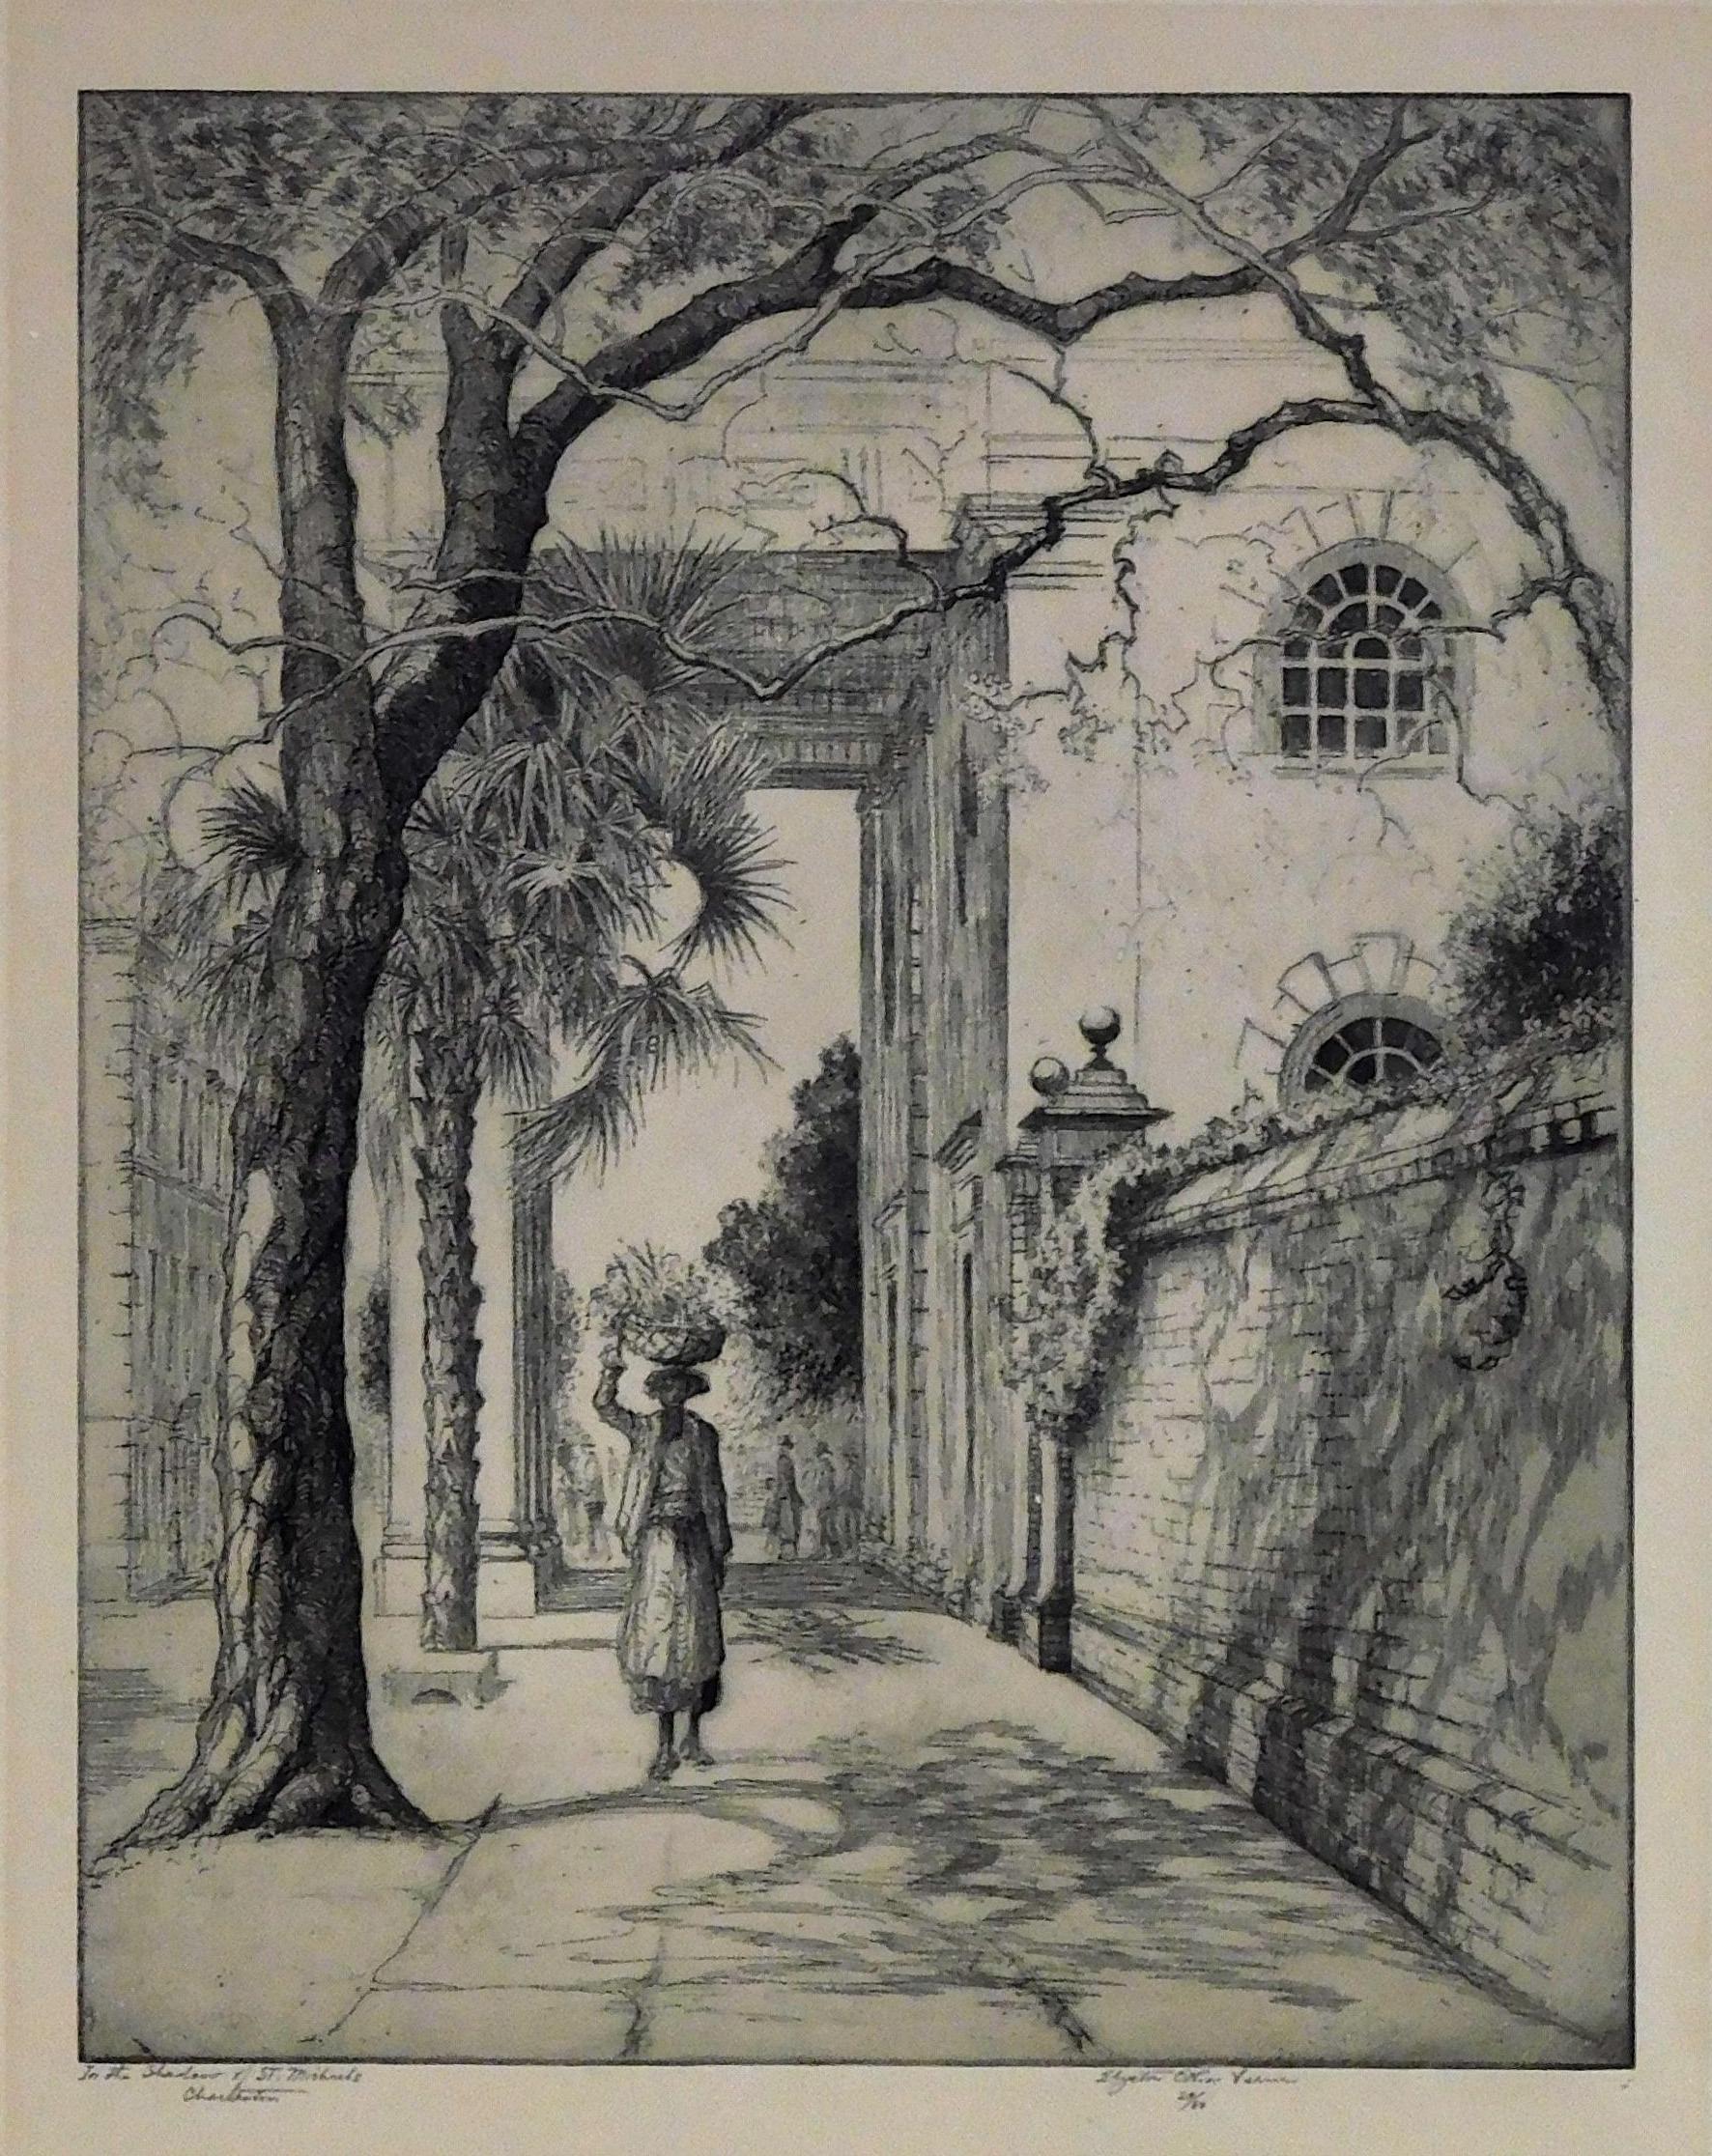 Original etching by well-known Charleston, SC artist Elizabeth O’Neill Verner.
Title: “In the Shadow of St. Michael’s - Charleston” 
Measures: 9 7/8 x 7 3/4 image size. 17 7/8 x 13 7/8 mat size.
Created circa 1928. The print is no. 28 of the